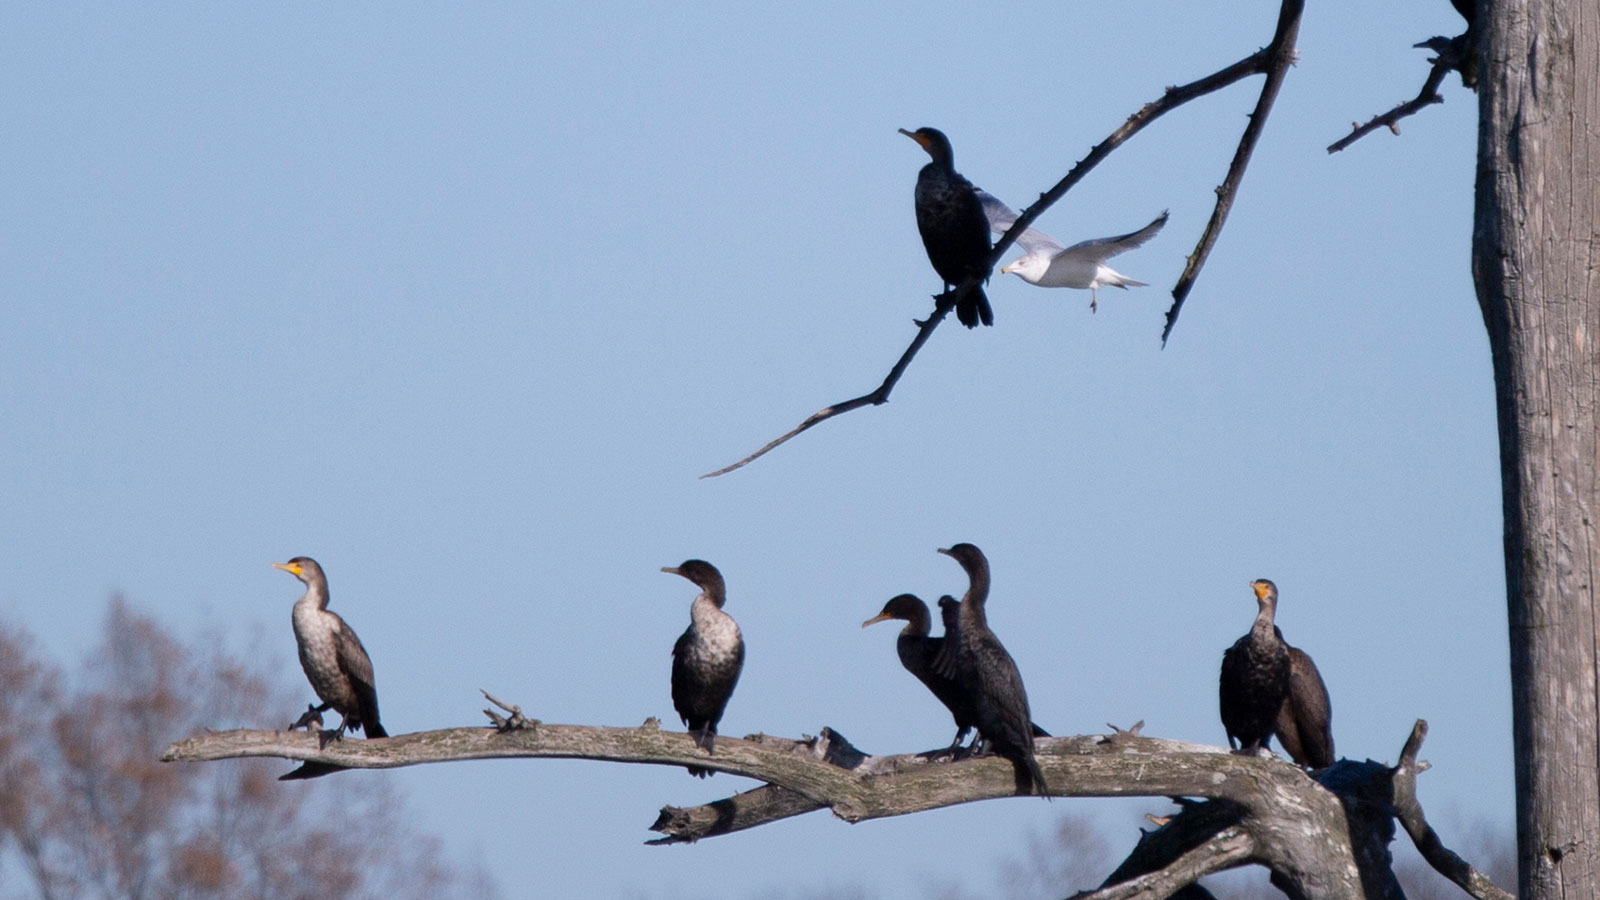 Adult and immature double-crested cormorants on a tree as a ring-billed gull flies by